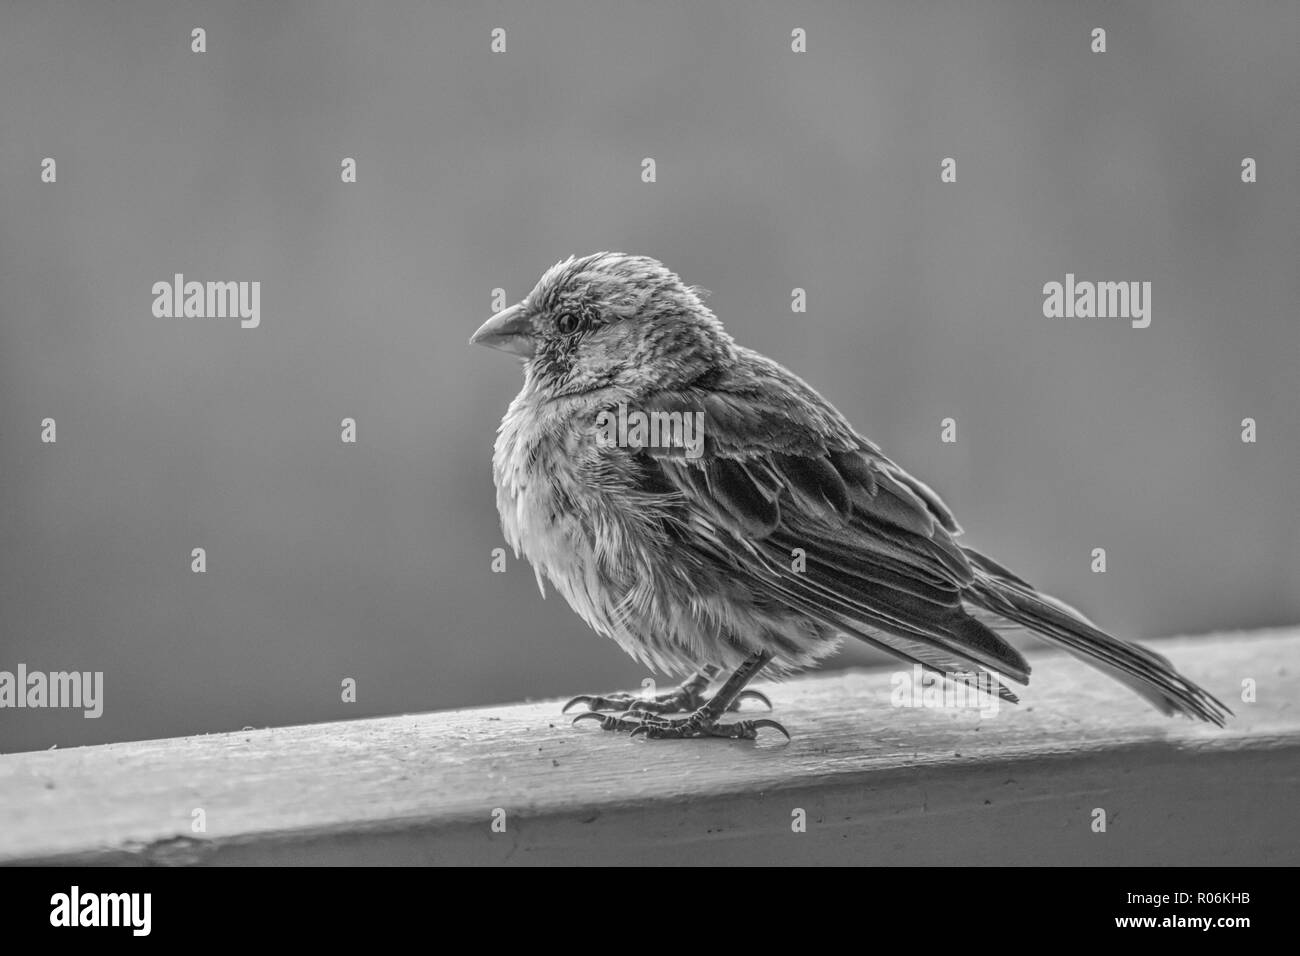 Close up profile black and white detail of House Finch tropical bird on railing with feathers fluffed from rain Stock Photo